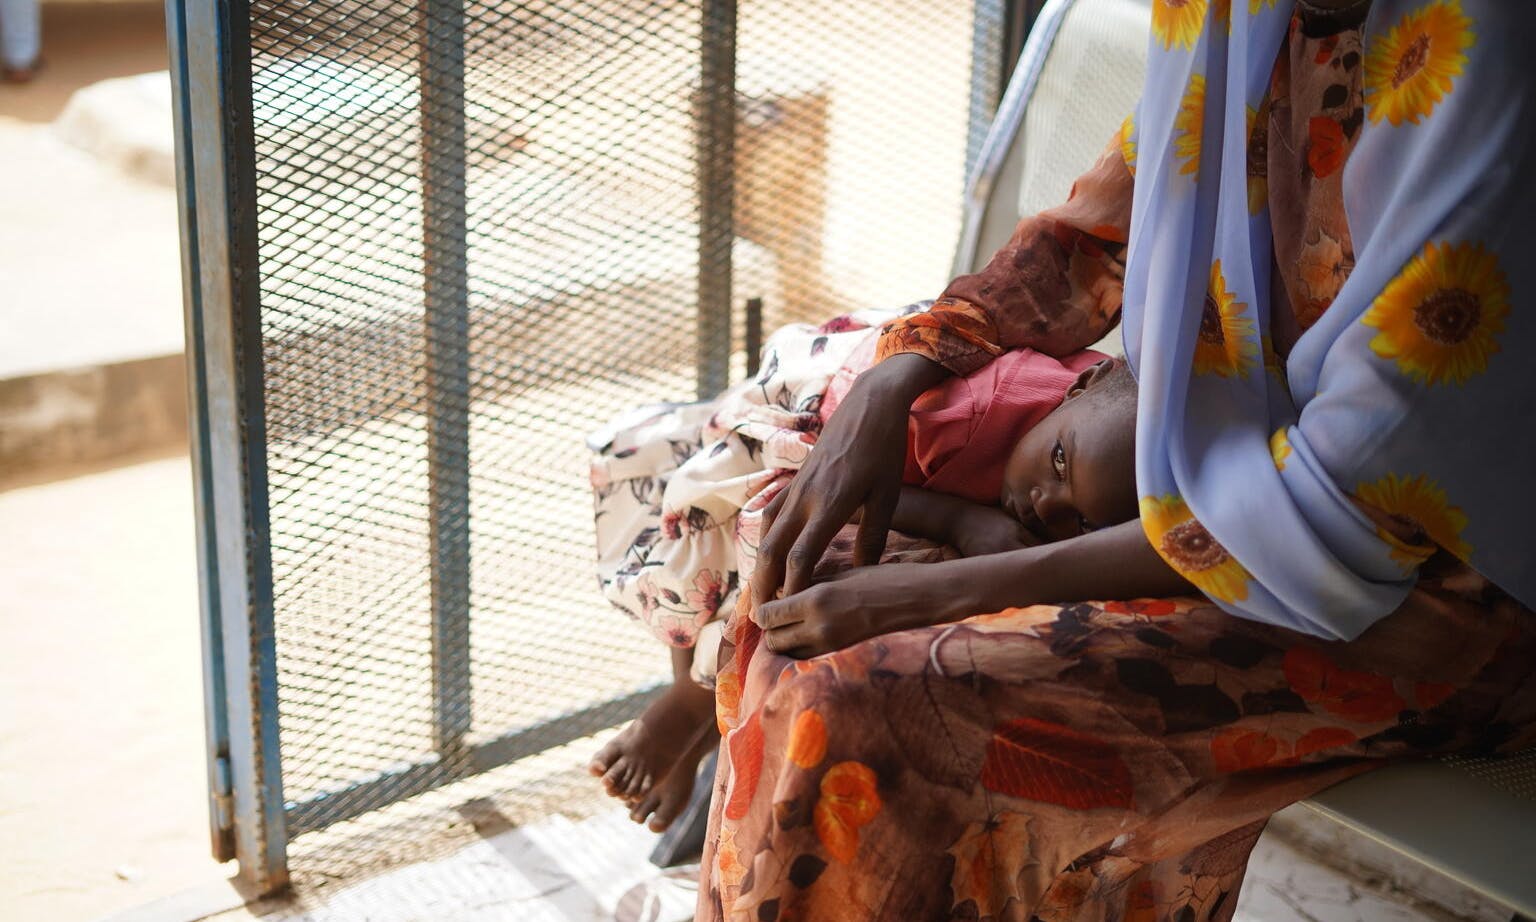 May 2023, a parent awaits healthcare services at Fashir Reproductive health centre in Sudan. The centre received WASH and health supplies from UNICEF